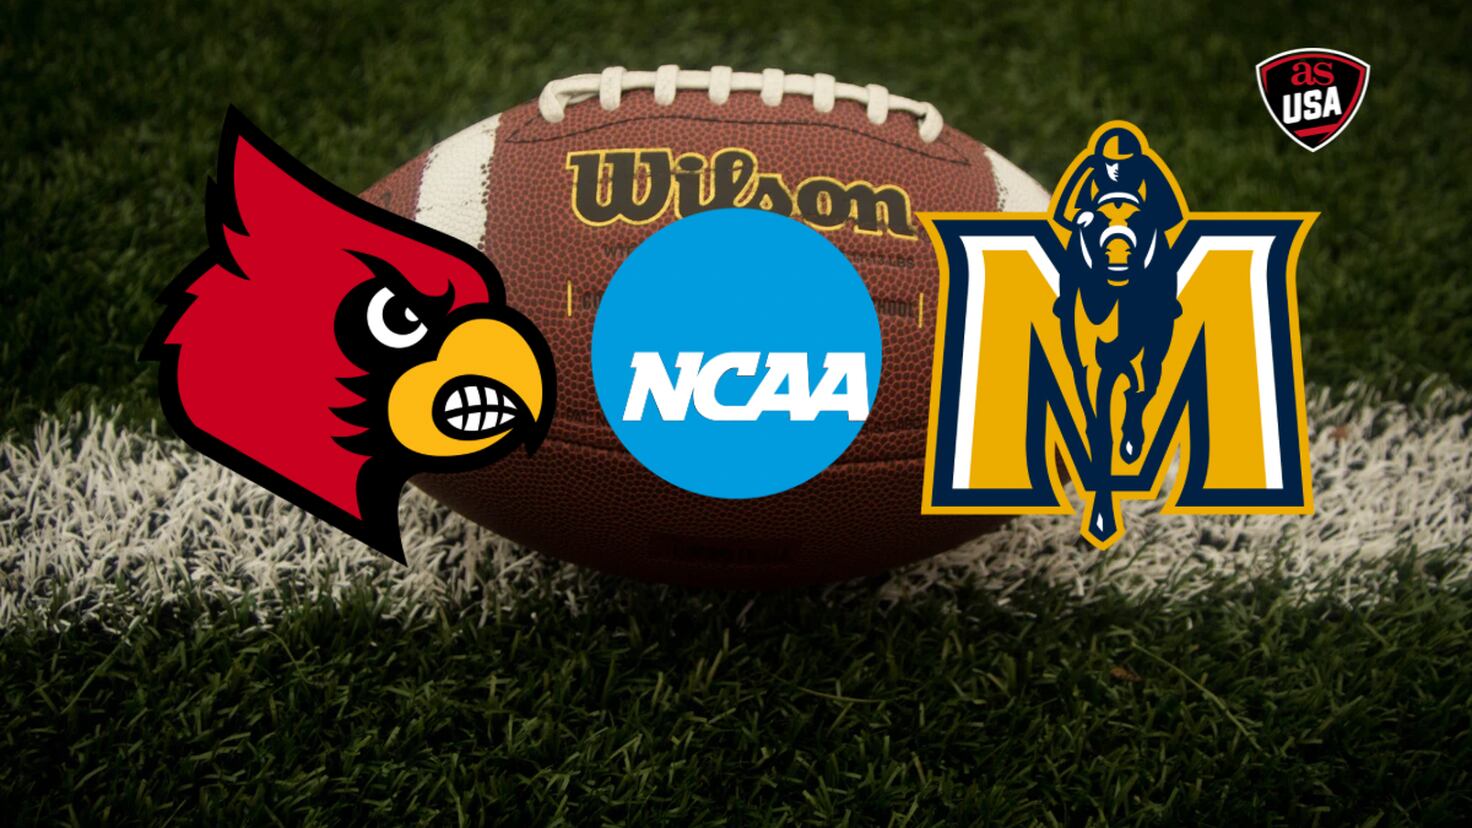 Louisville vs. Murray State: How to watch, stream college football for free  